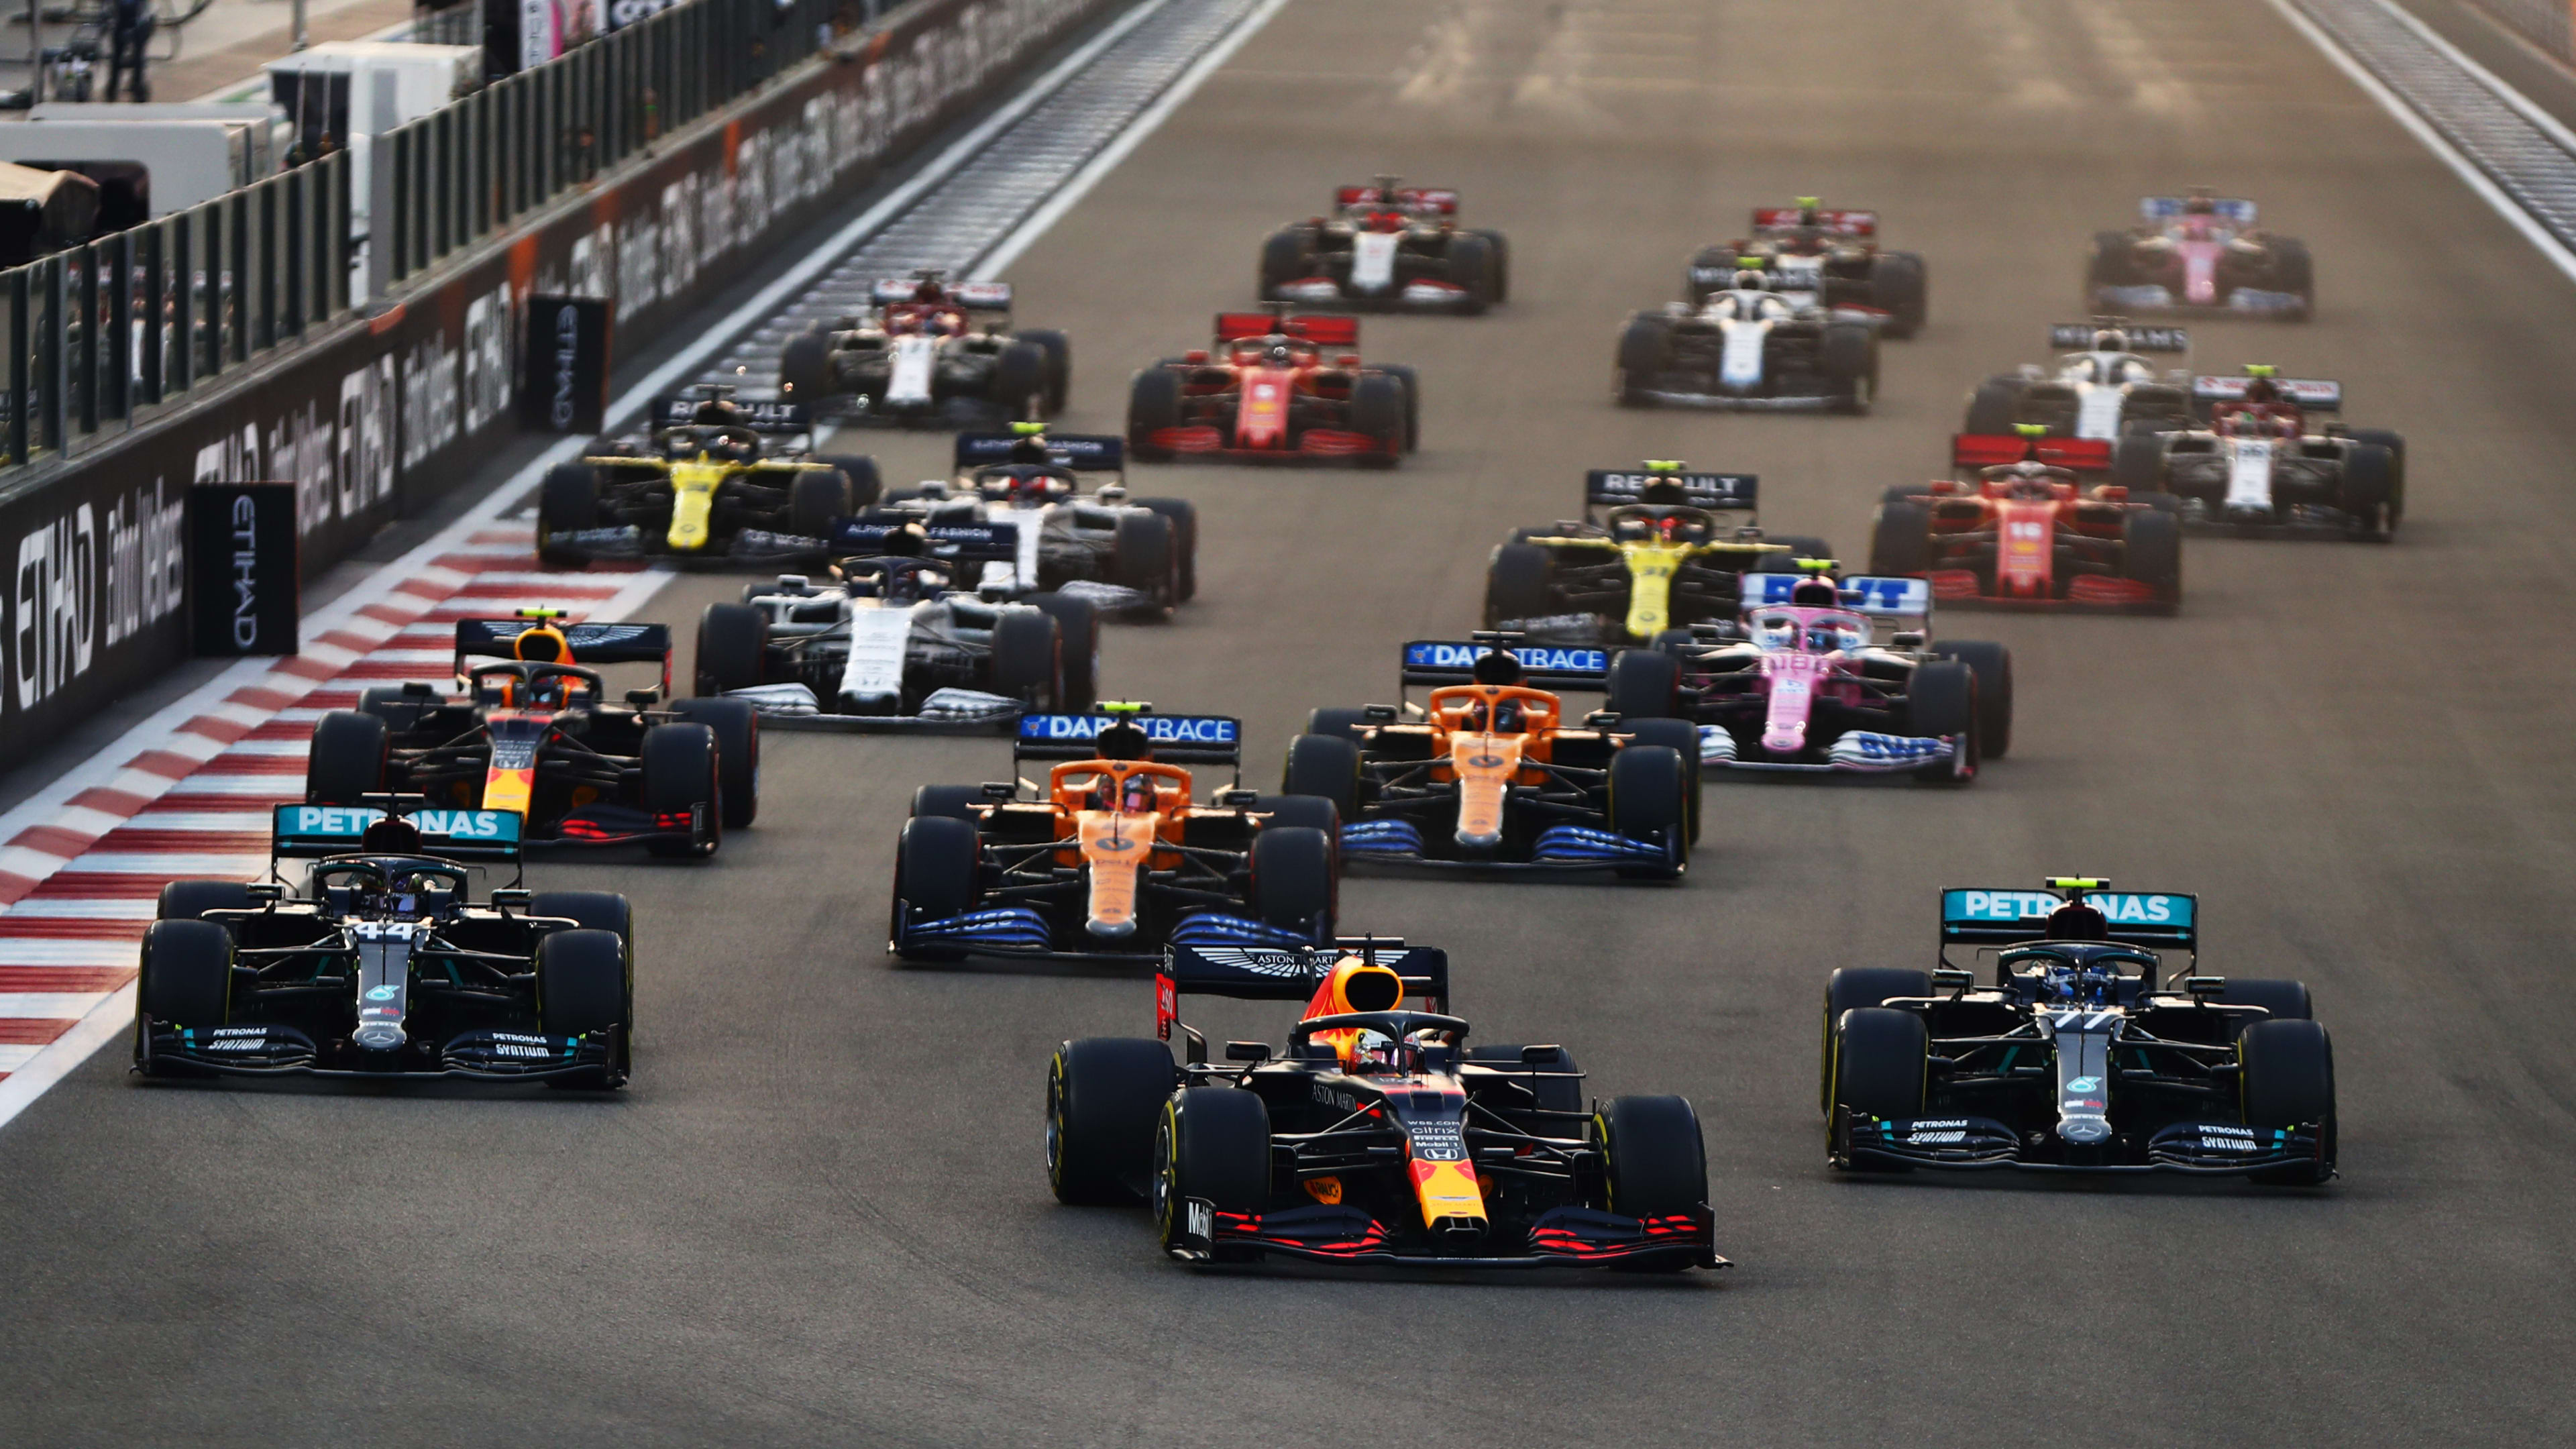 5 key reasons why the F1 pecking order could be shaken up in 2021 Formula 1®